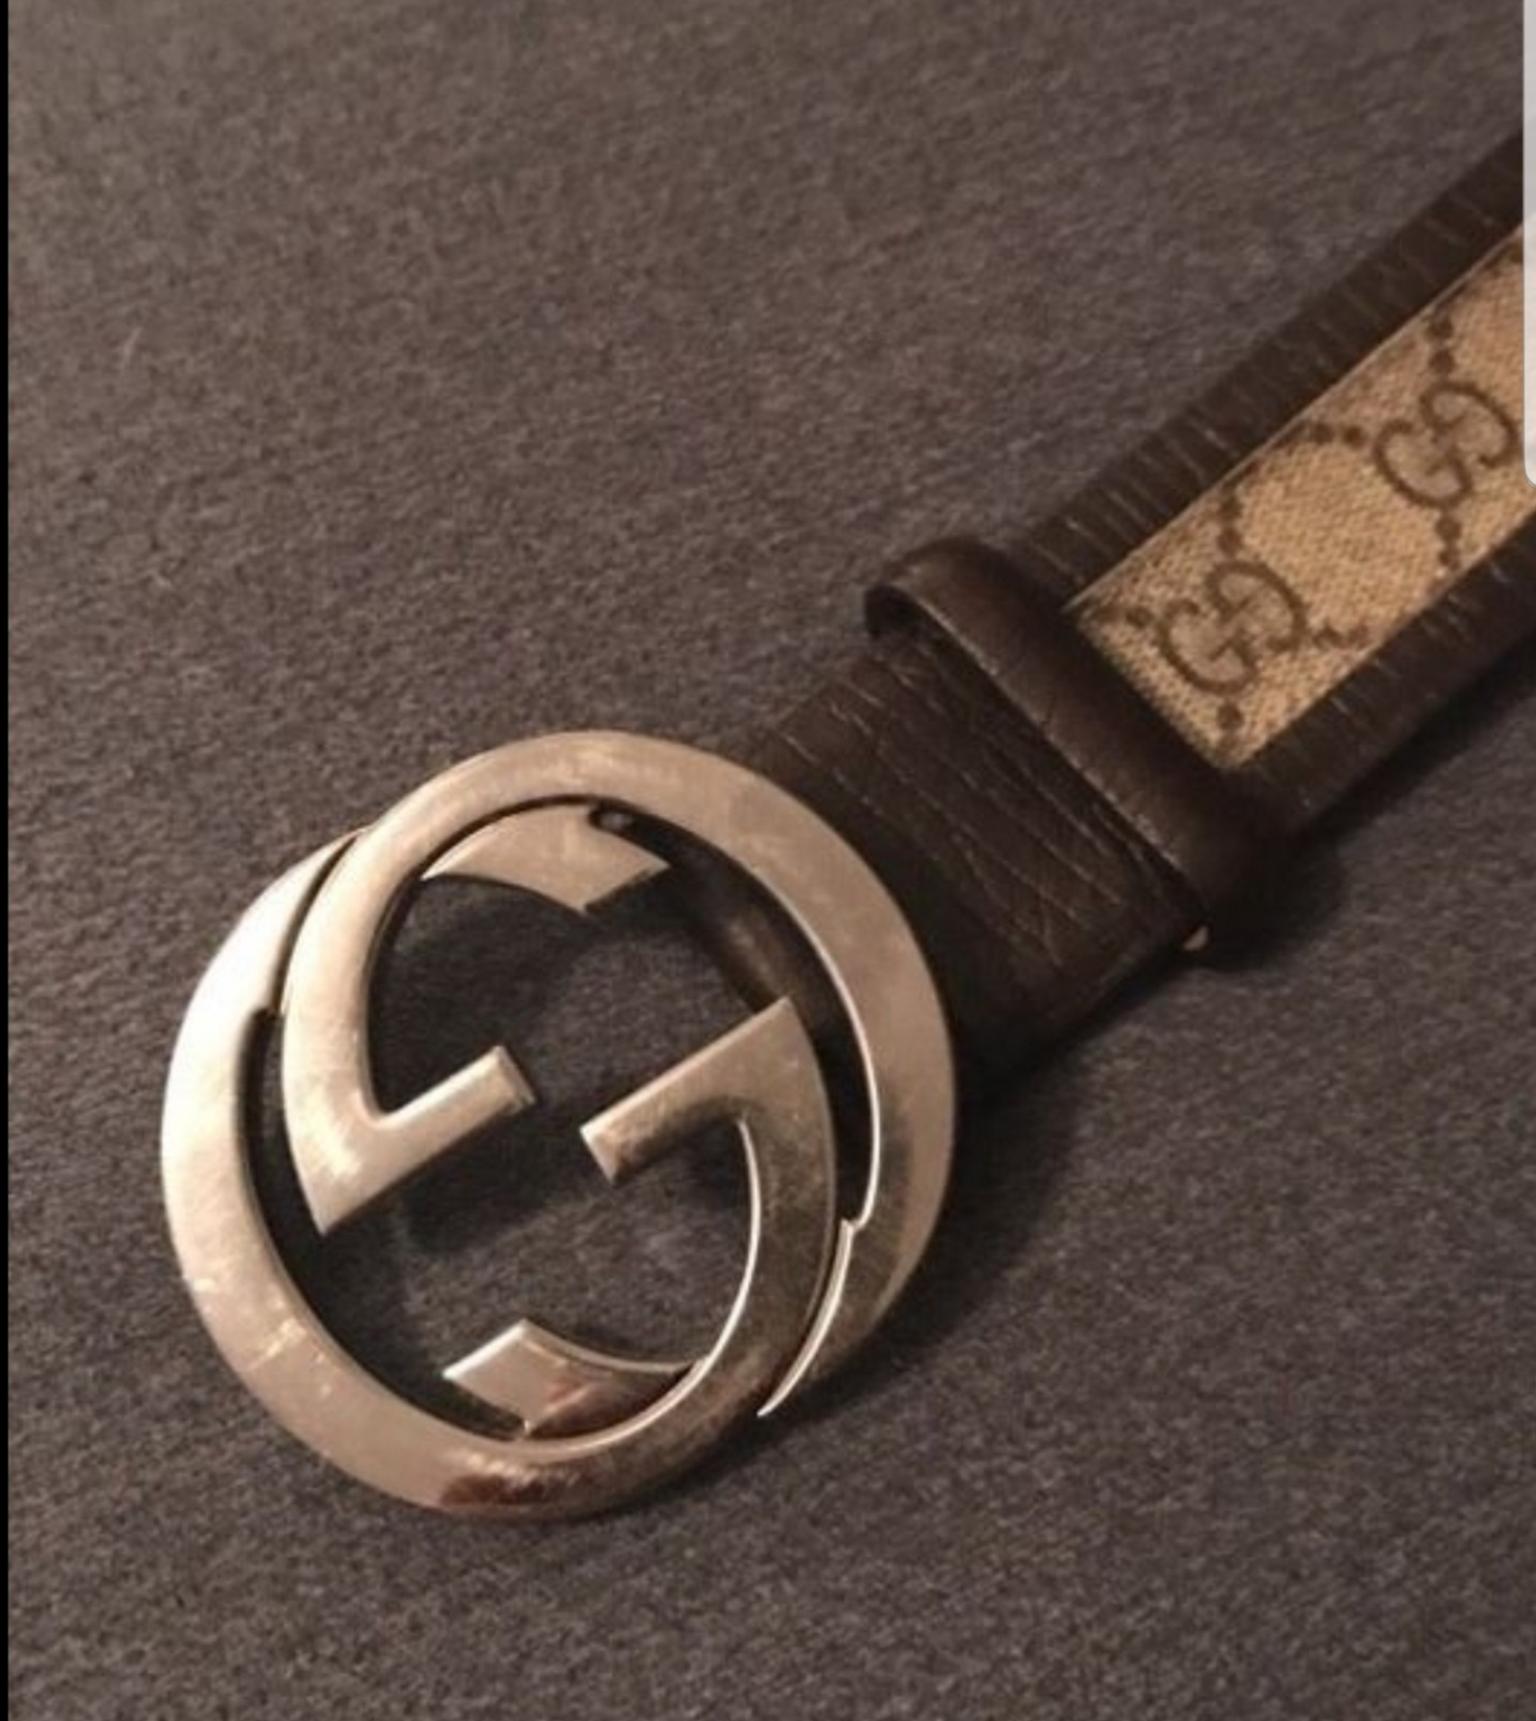 Used Authentic Gucci Belt with Receipt 